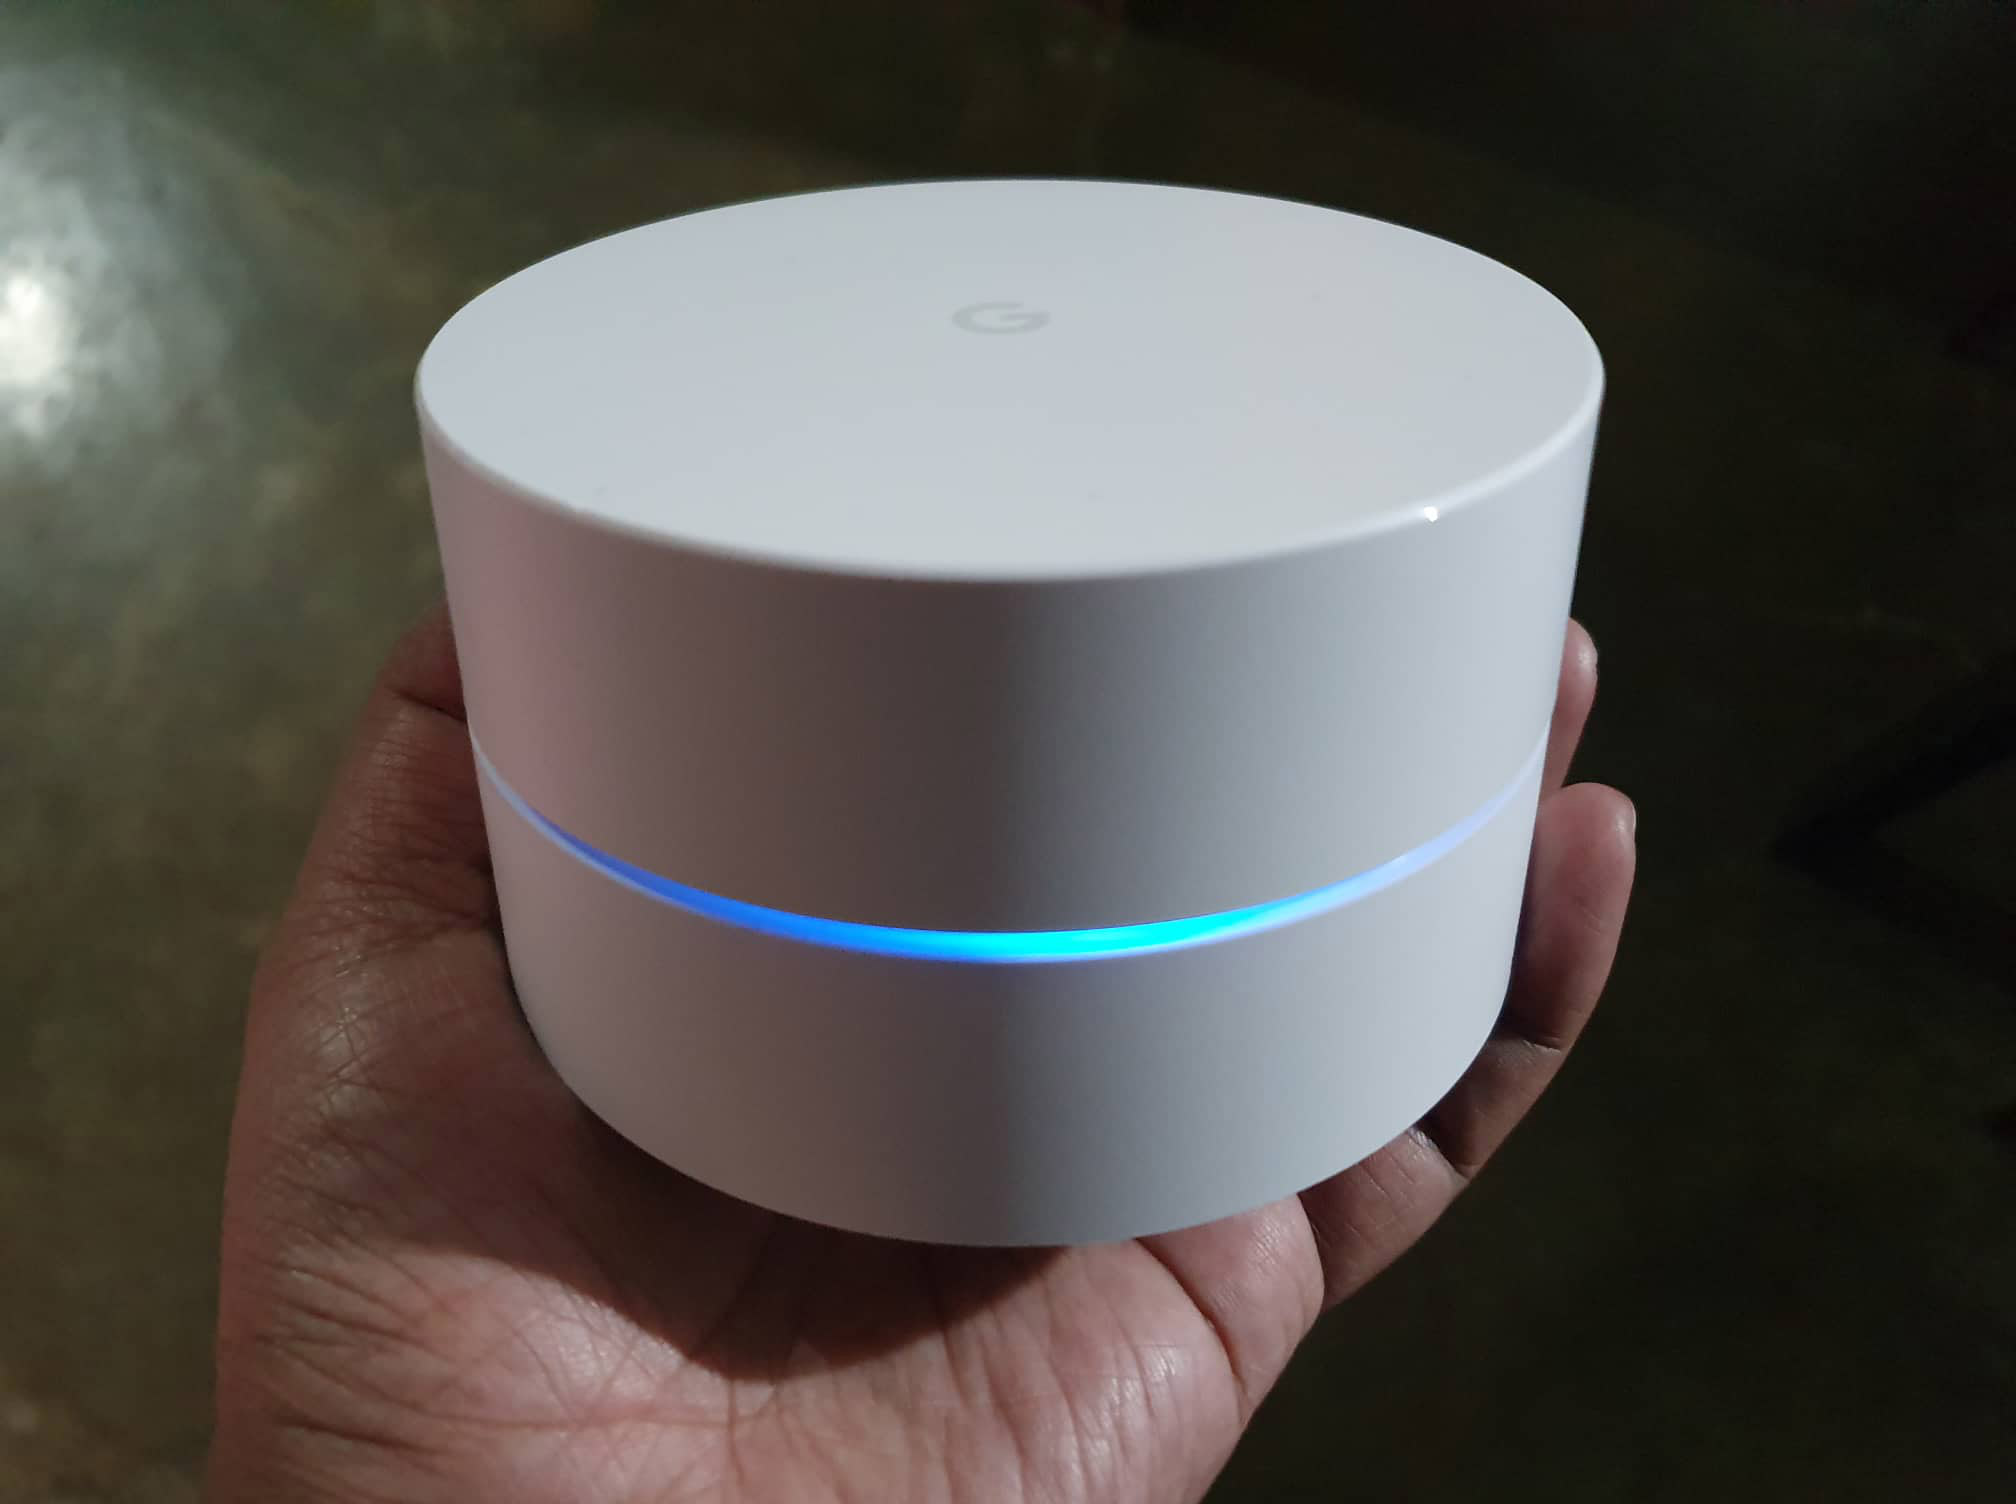 How to Fix Google Wifi Turns Blue then Off Light After Factory